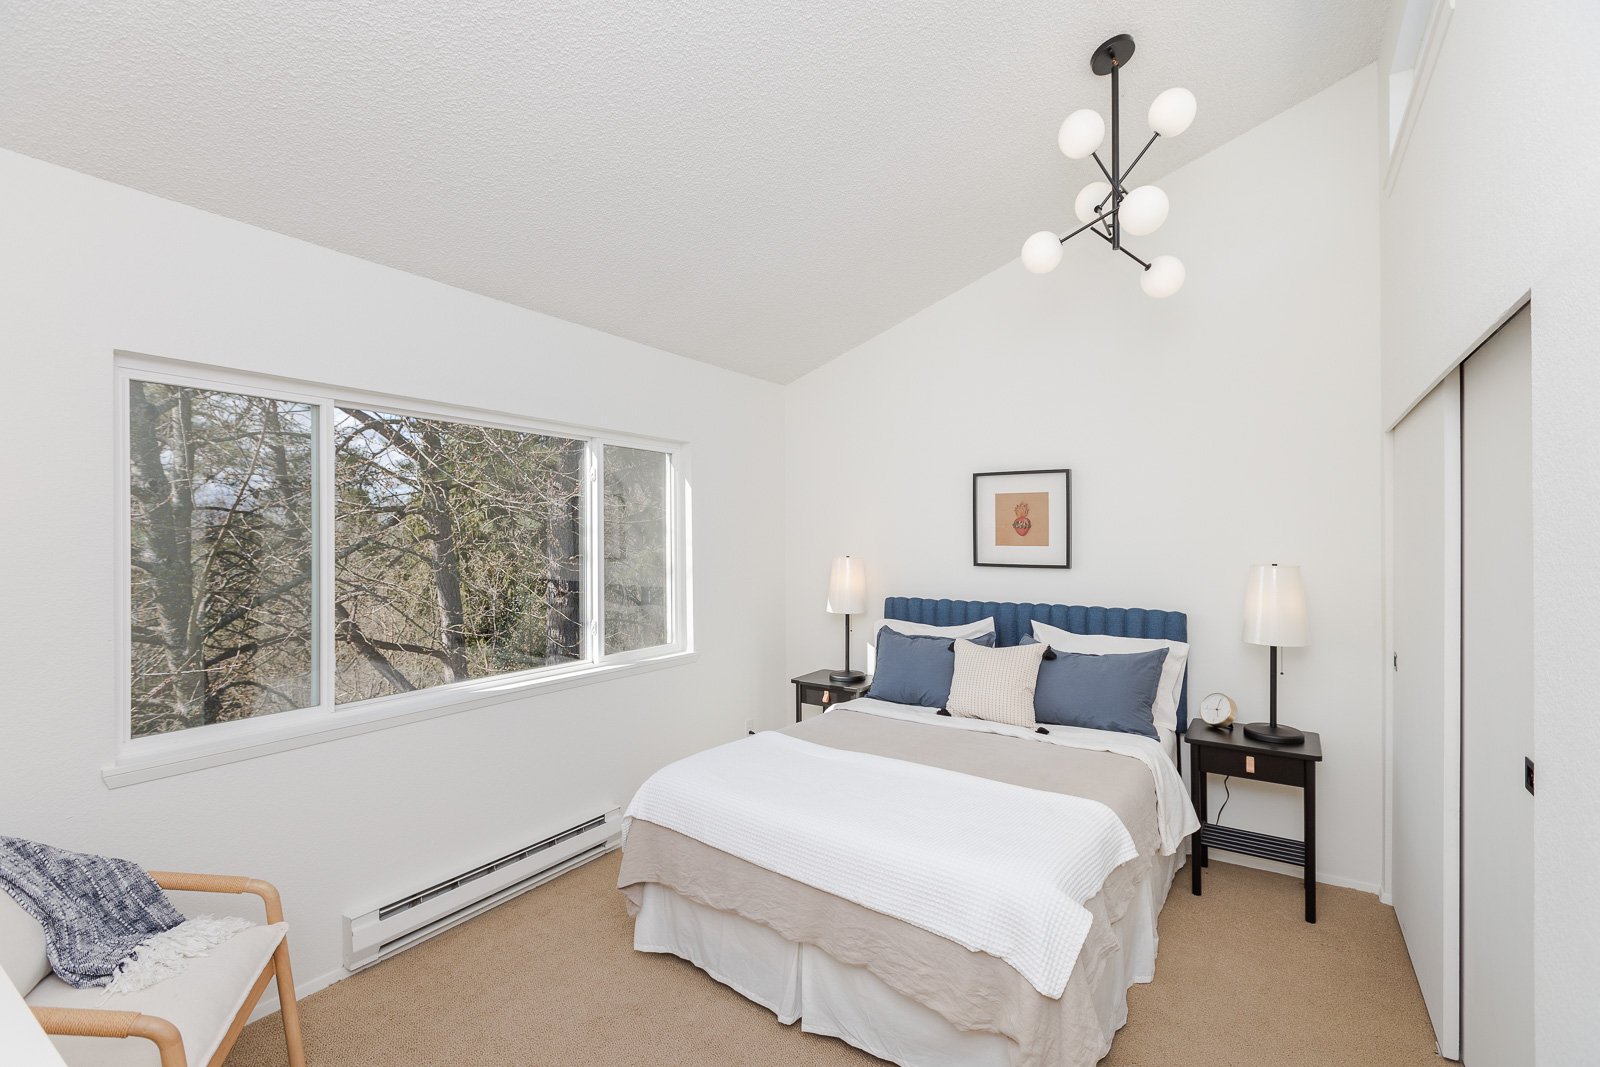  Modern light fixtures throughout. Bedroom #1 of 2 is spacious and large, nature-facing windows.    